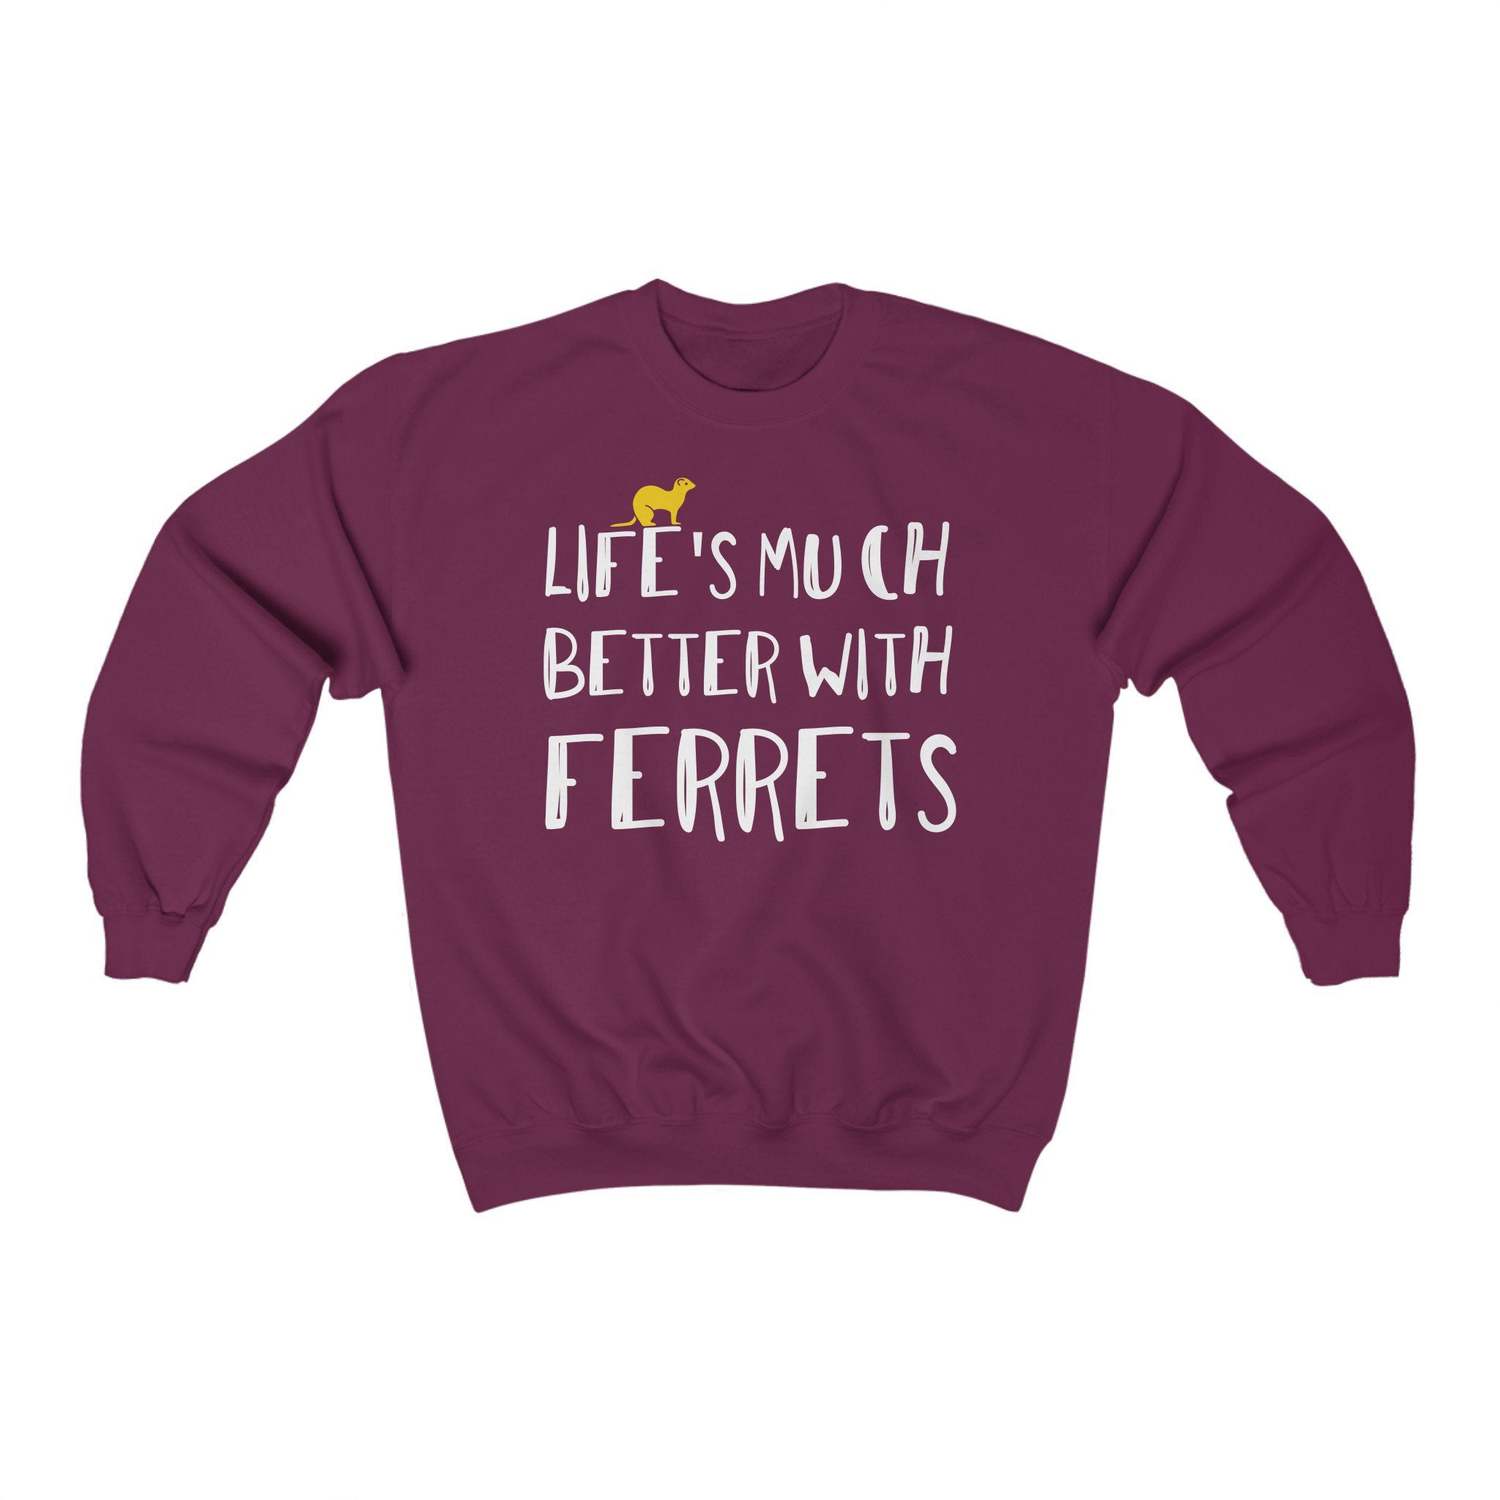 life's much better with ferrets funny sweatshirt 